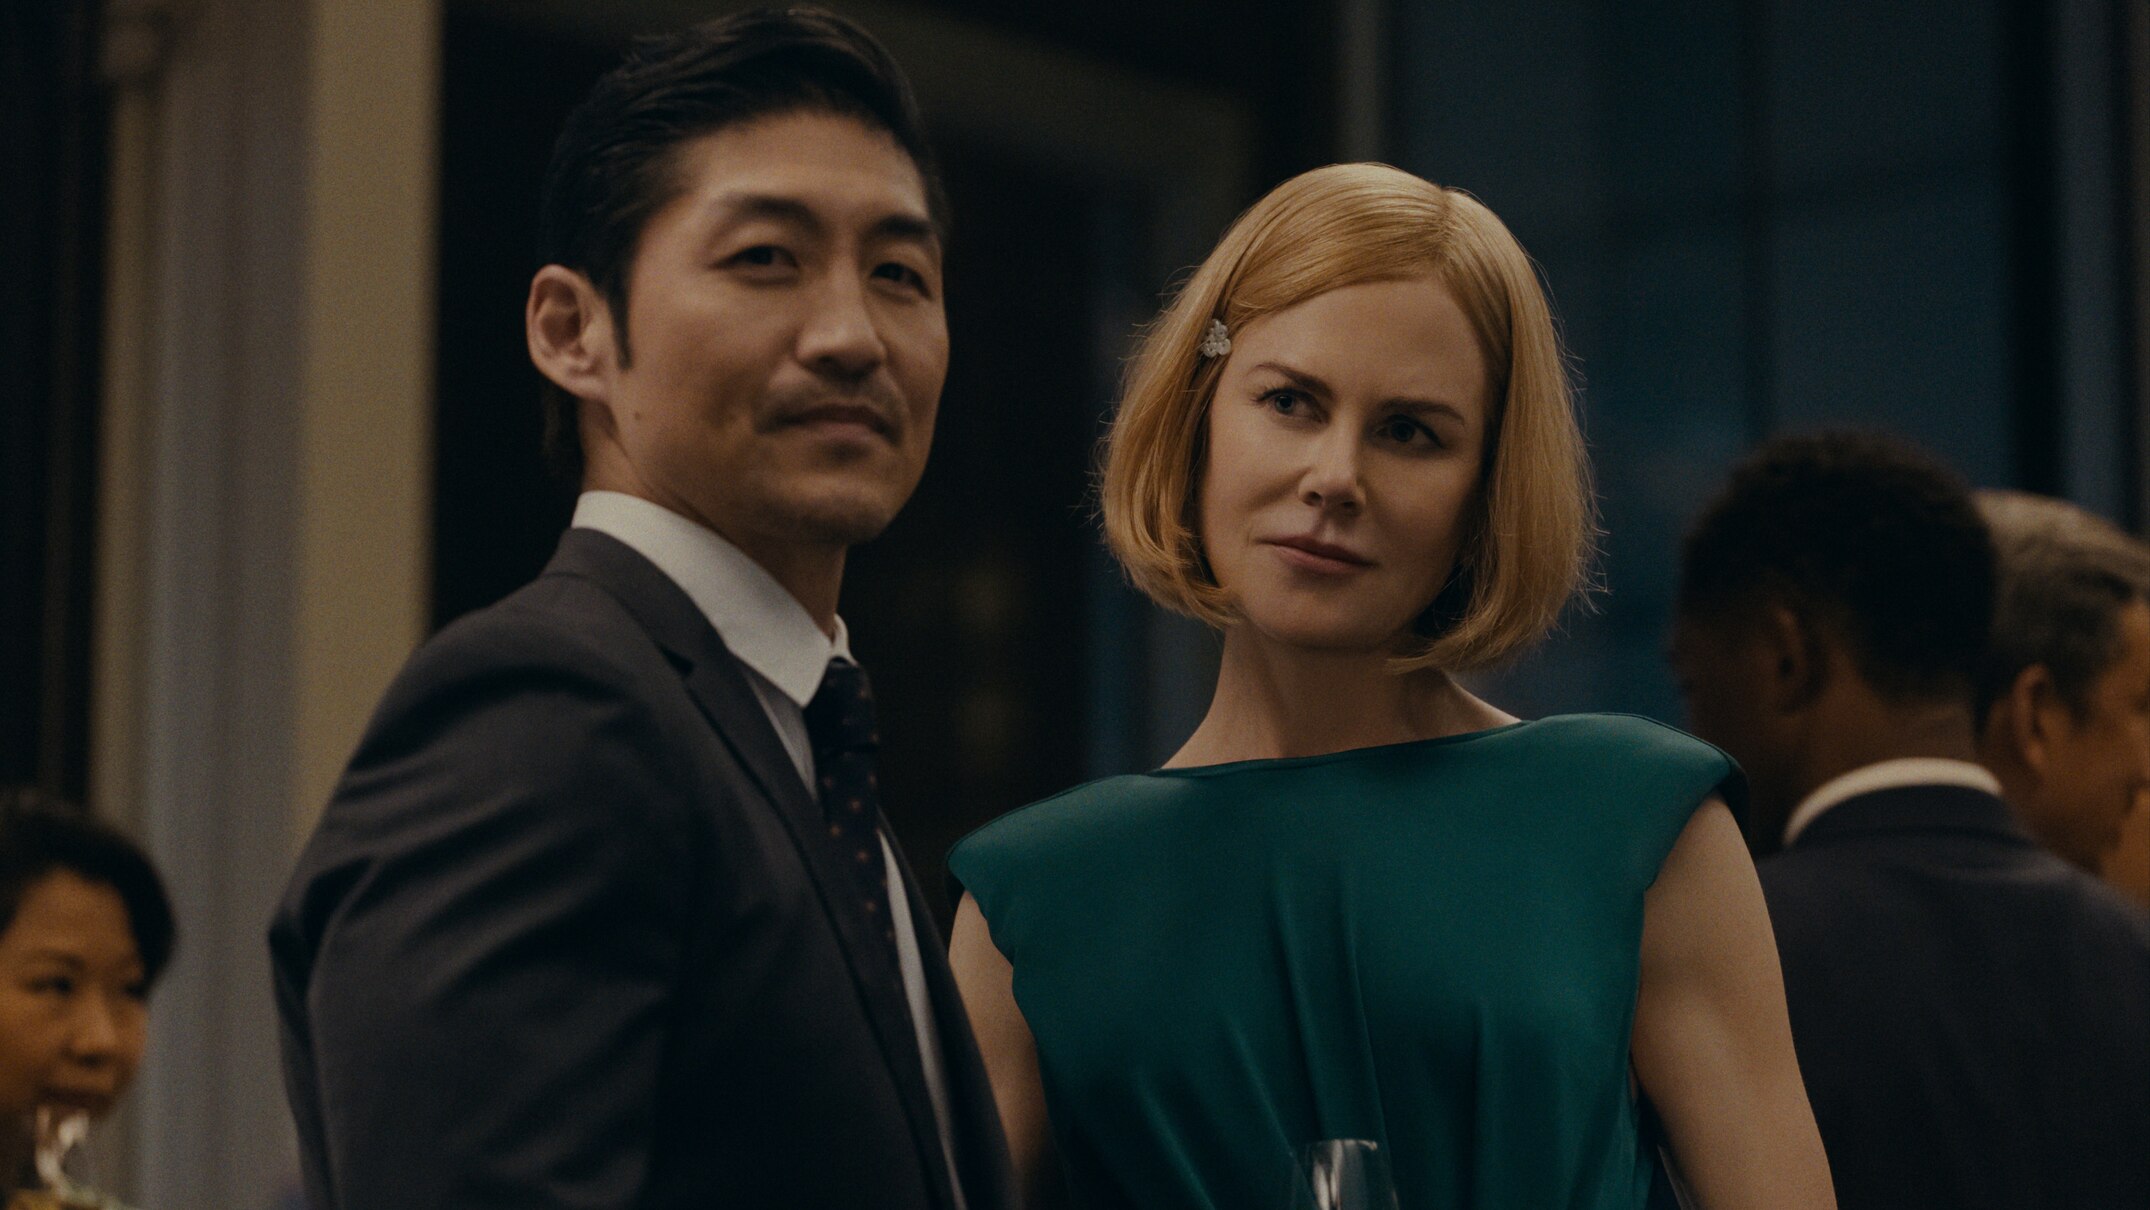 nicole kidman stars in new amazon prime video series expats, from the farewell director lulu wang